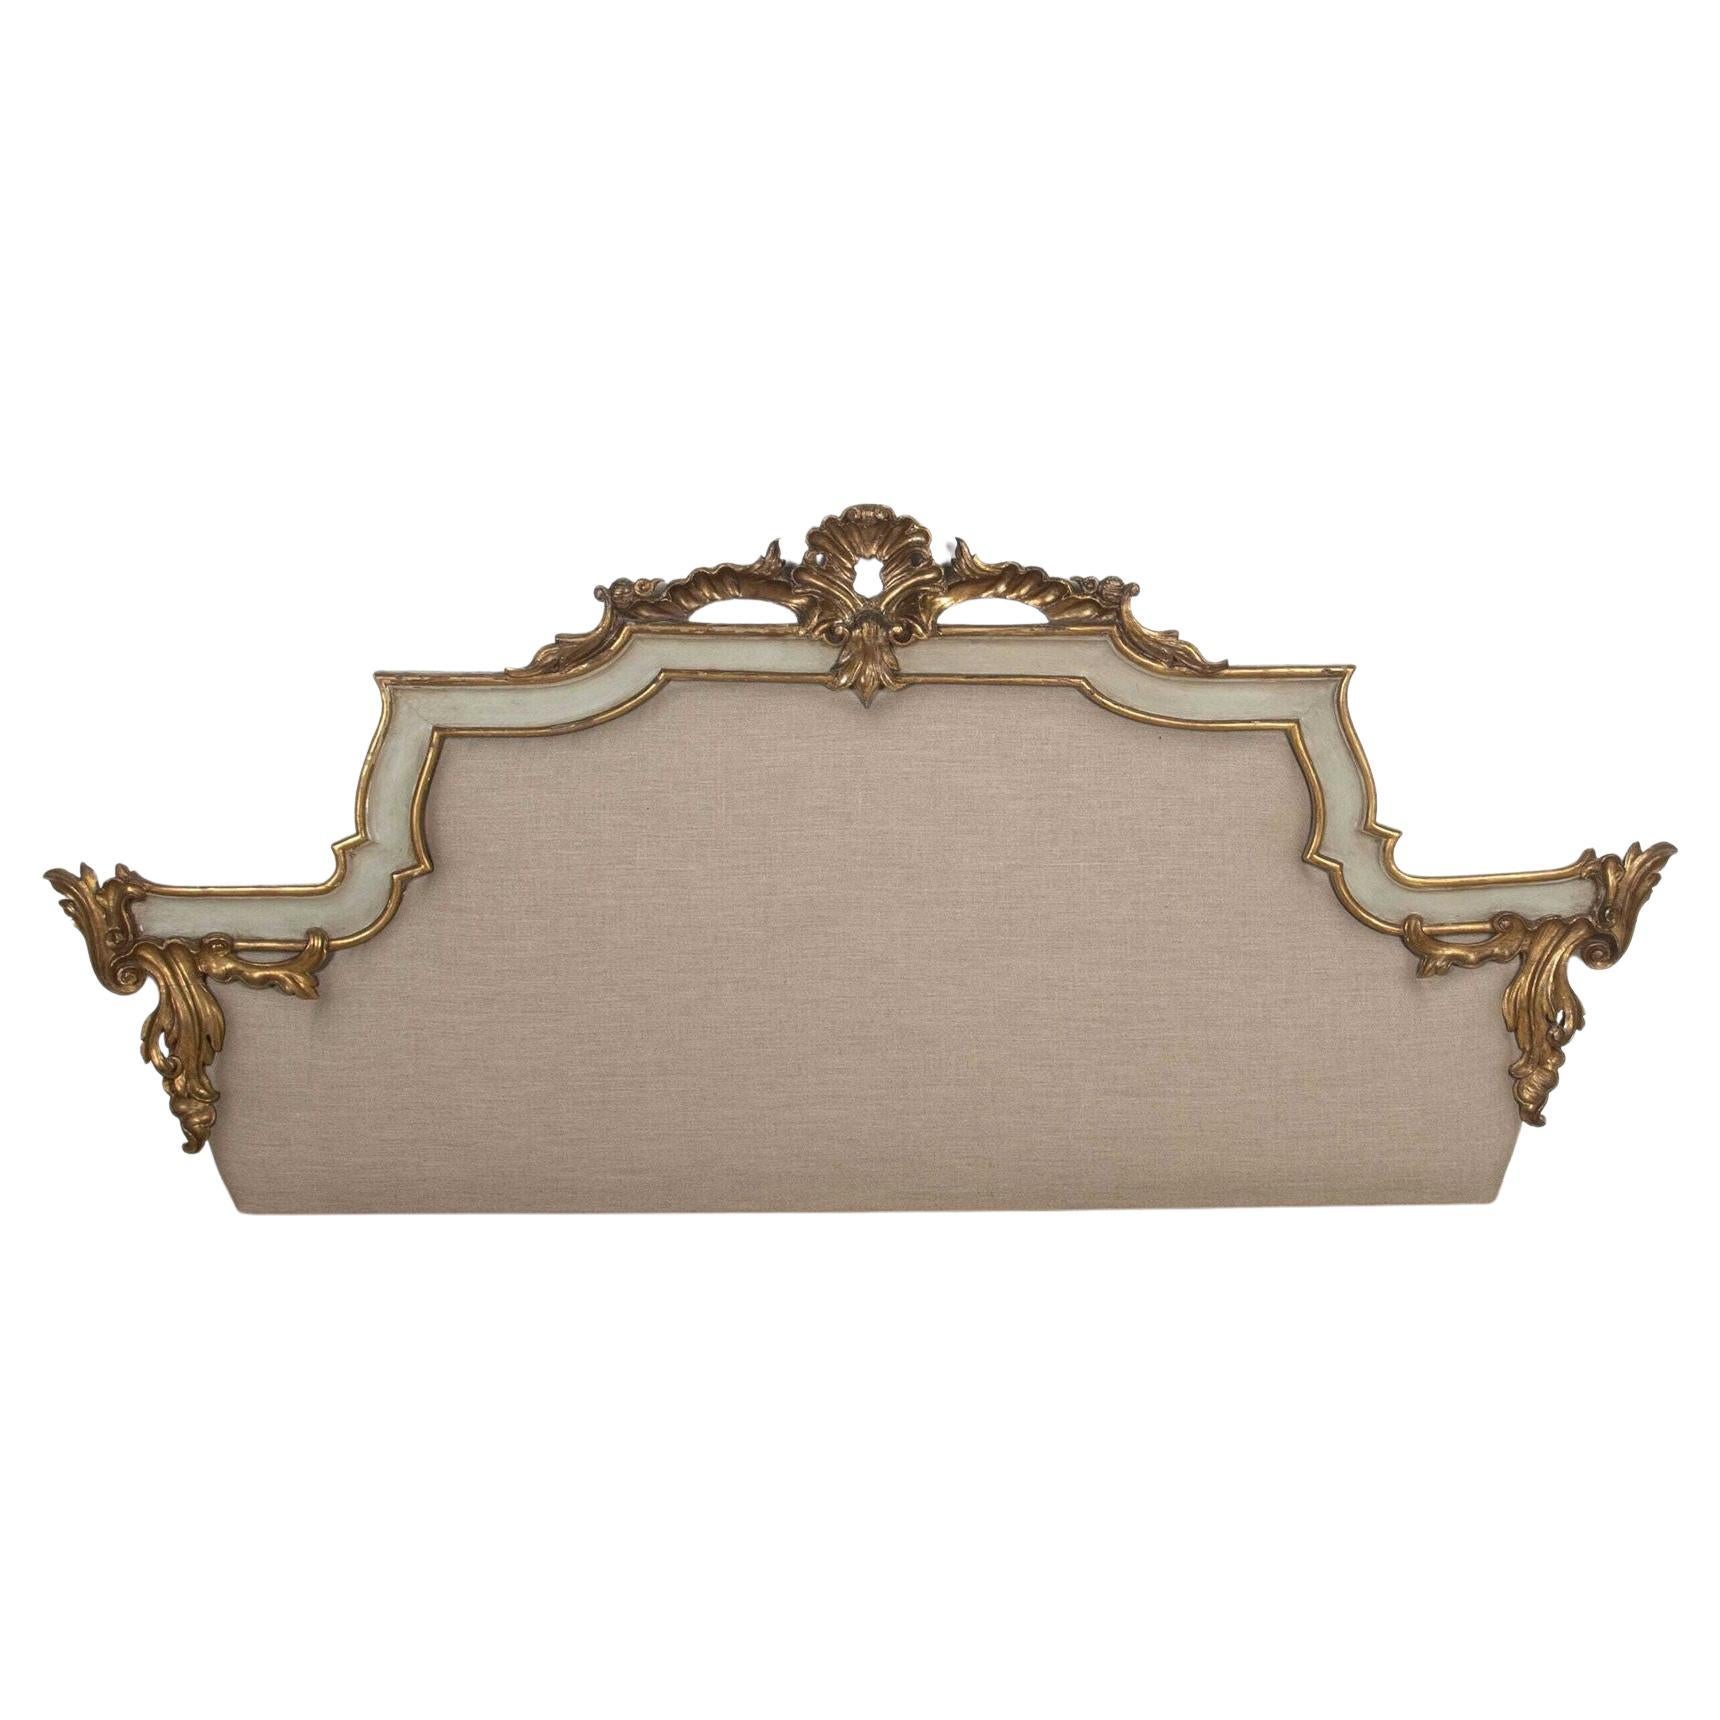 Large 19th Century Italian Giltwood Upholstered Headboard For Sale